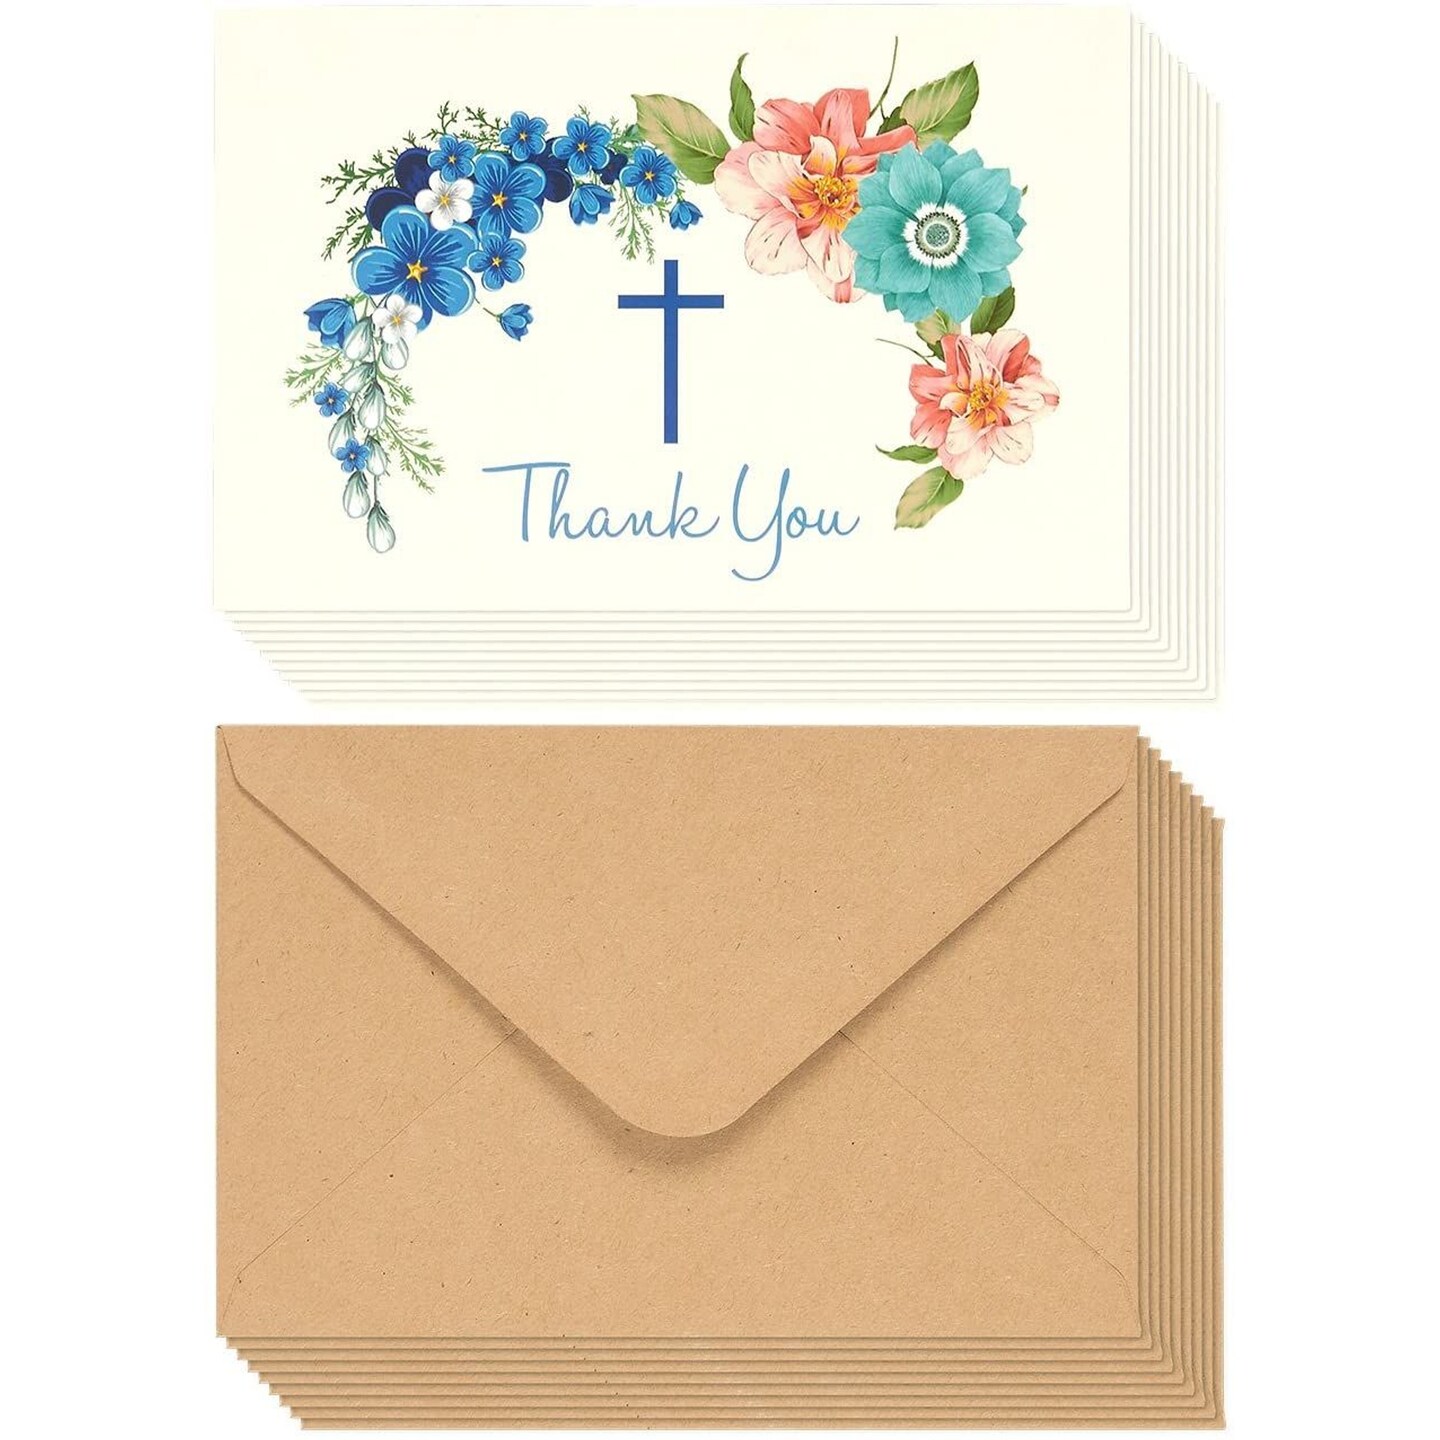 Christian Thank You Cards, Floral Cross Design with Envelopes (4 x 6 In, 48 Pack)